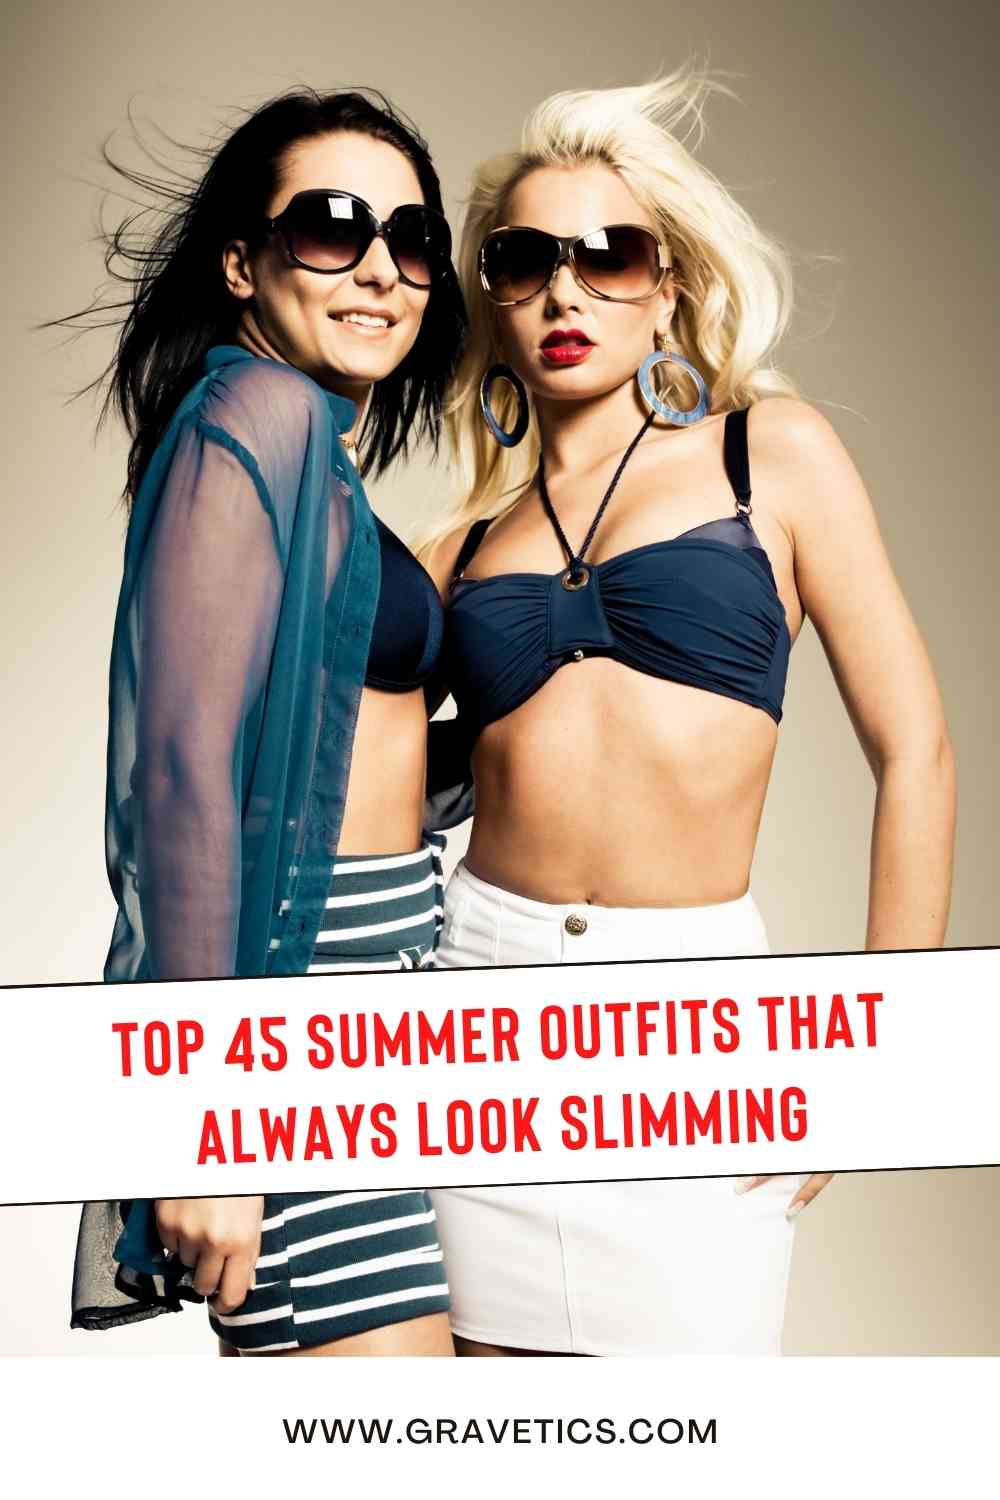 Top 45 Summer Outfits That Always Look Slimming